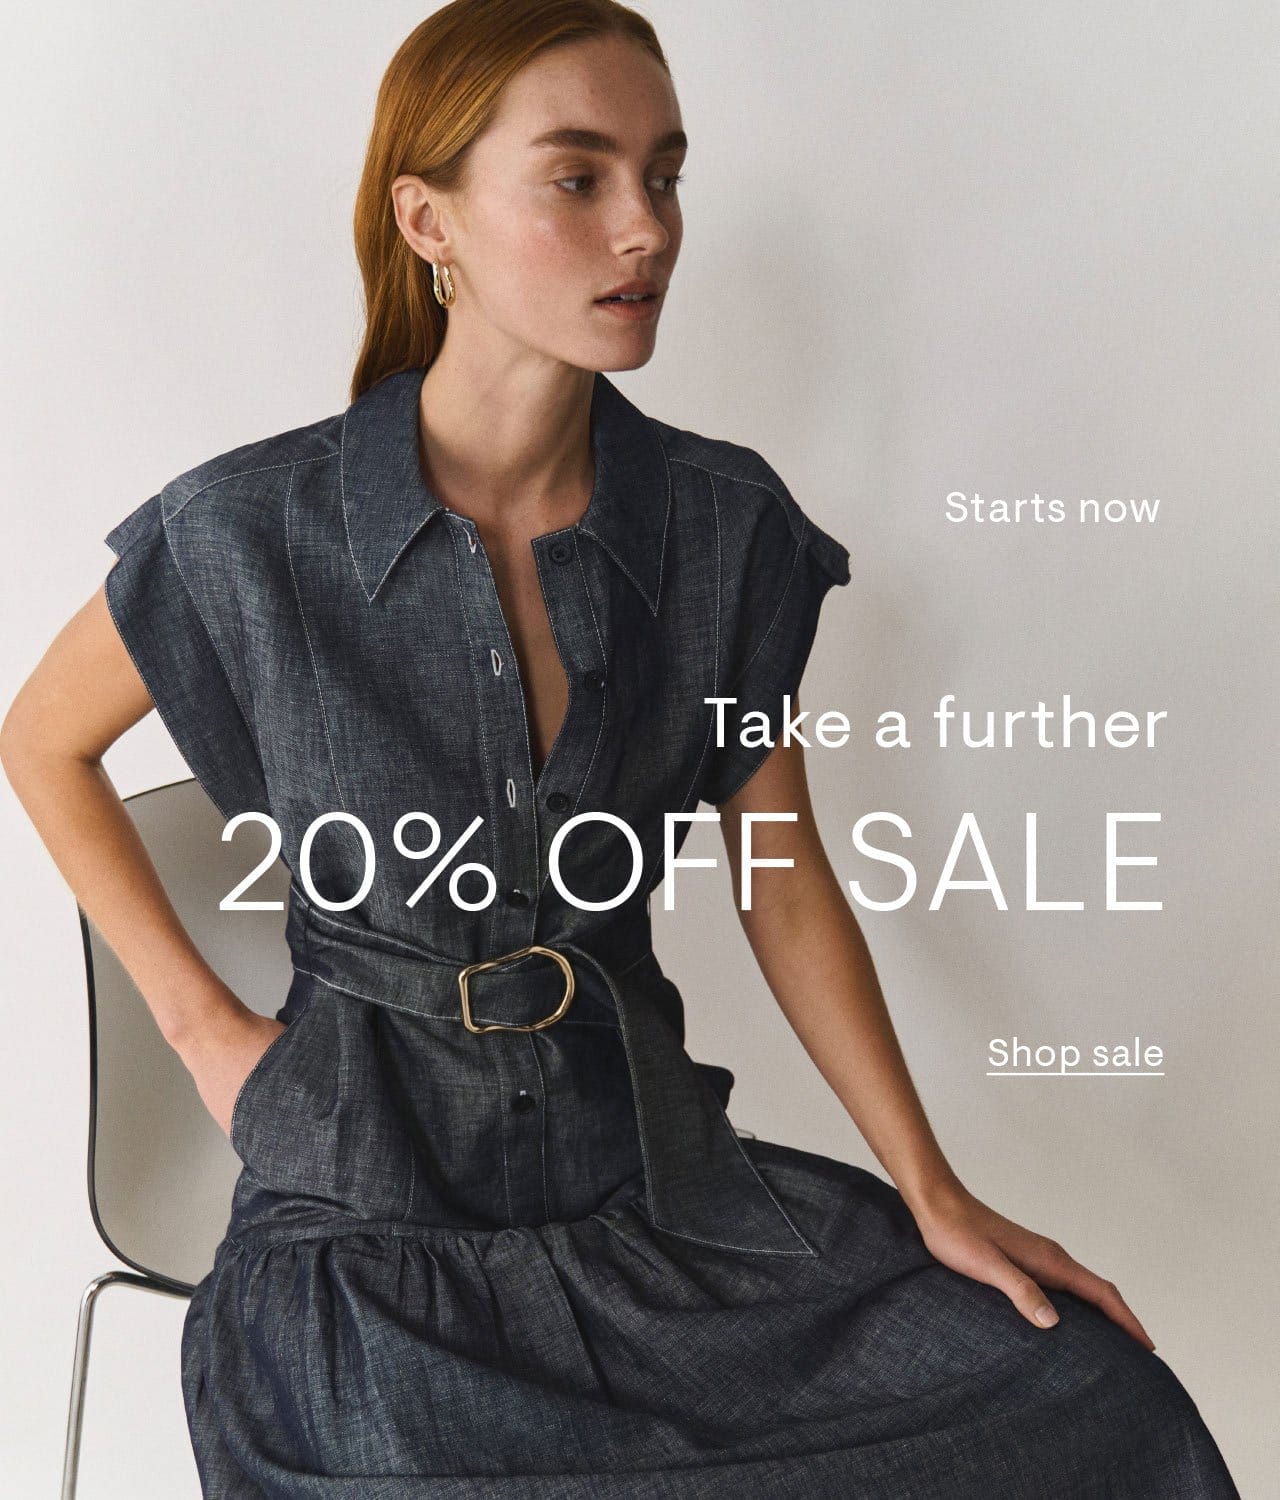 Take a further 20% off SALE